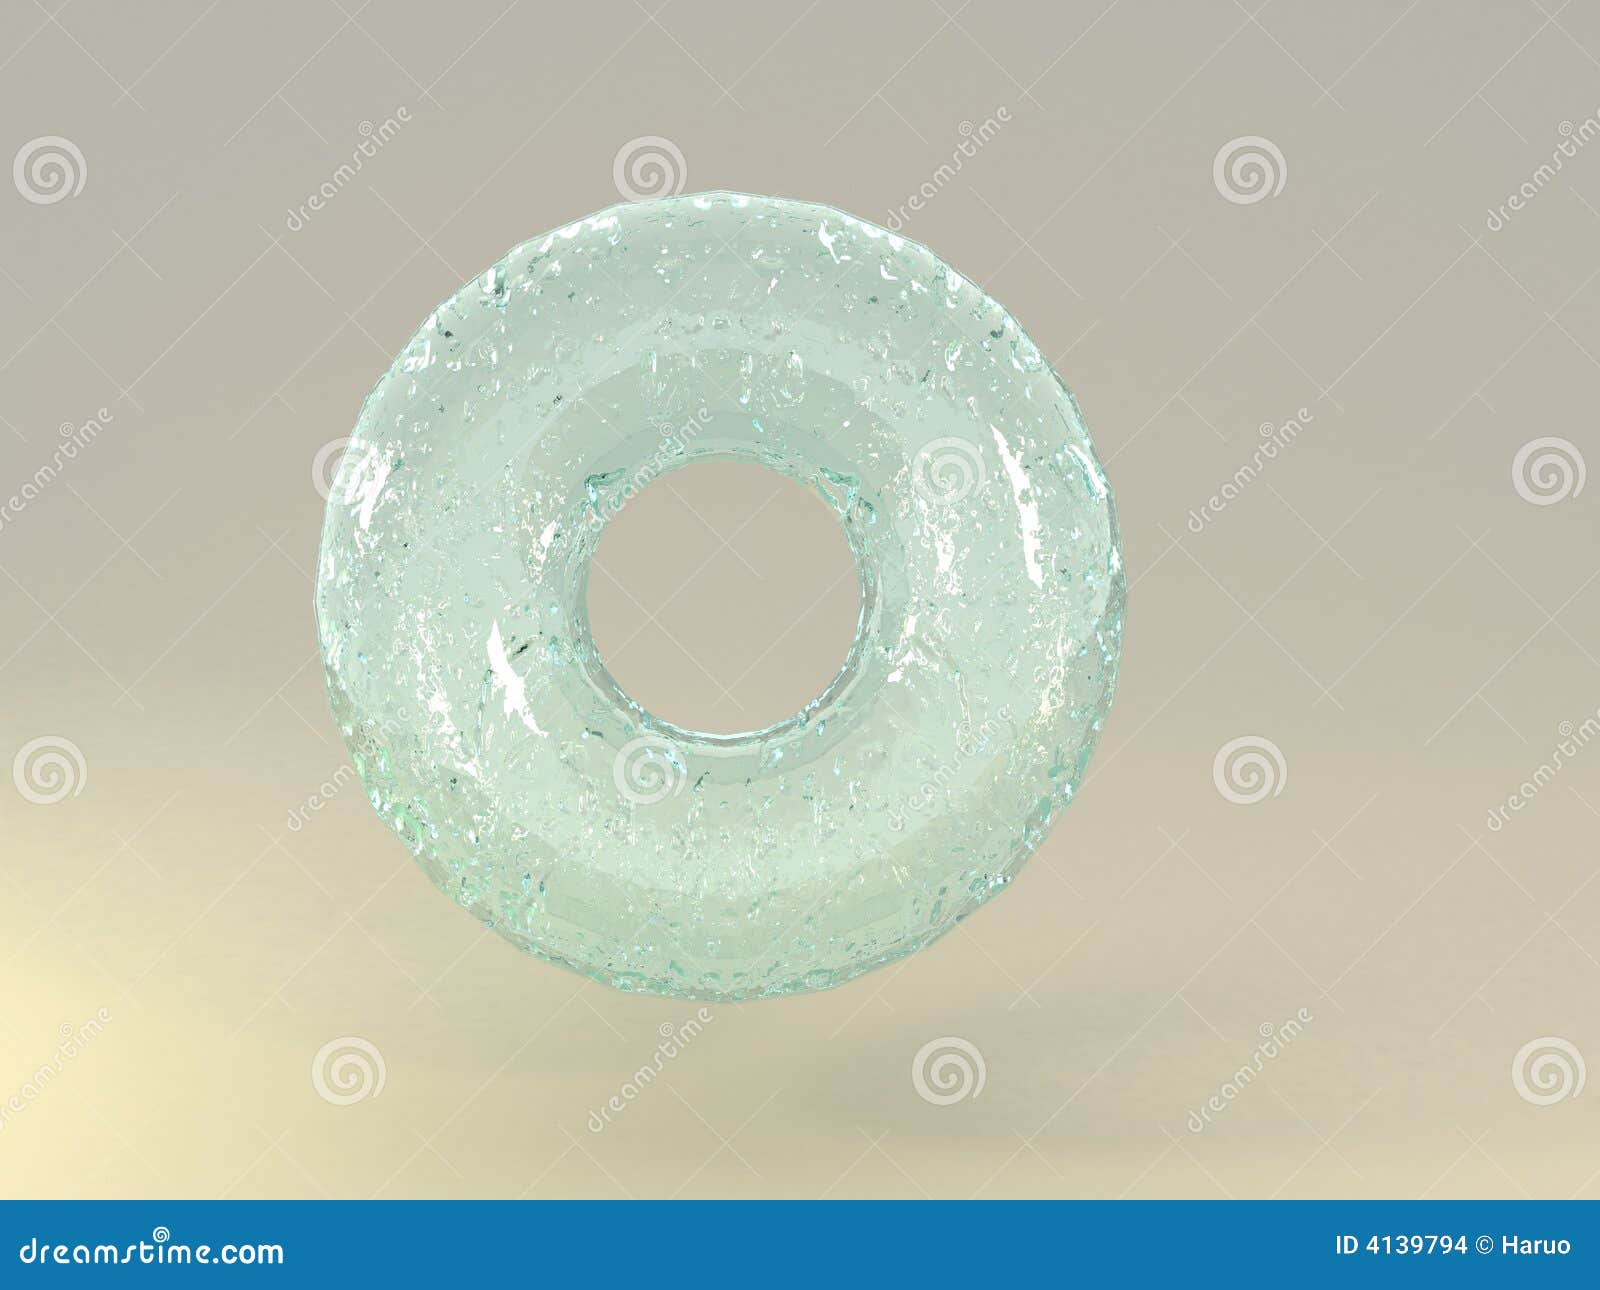 water donut